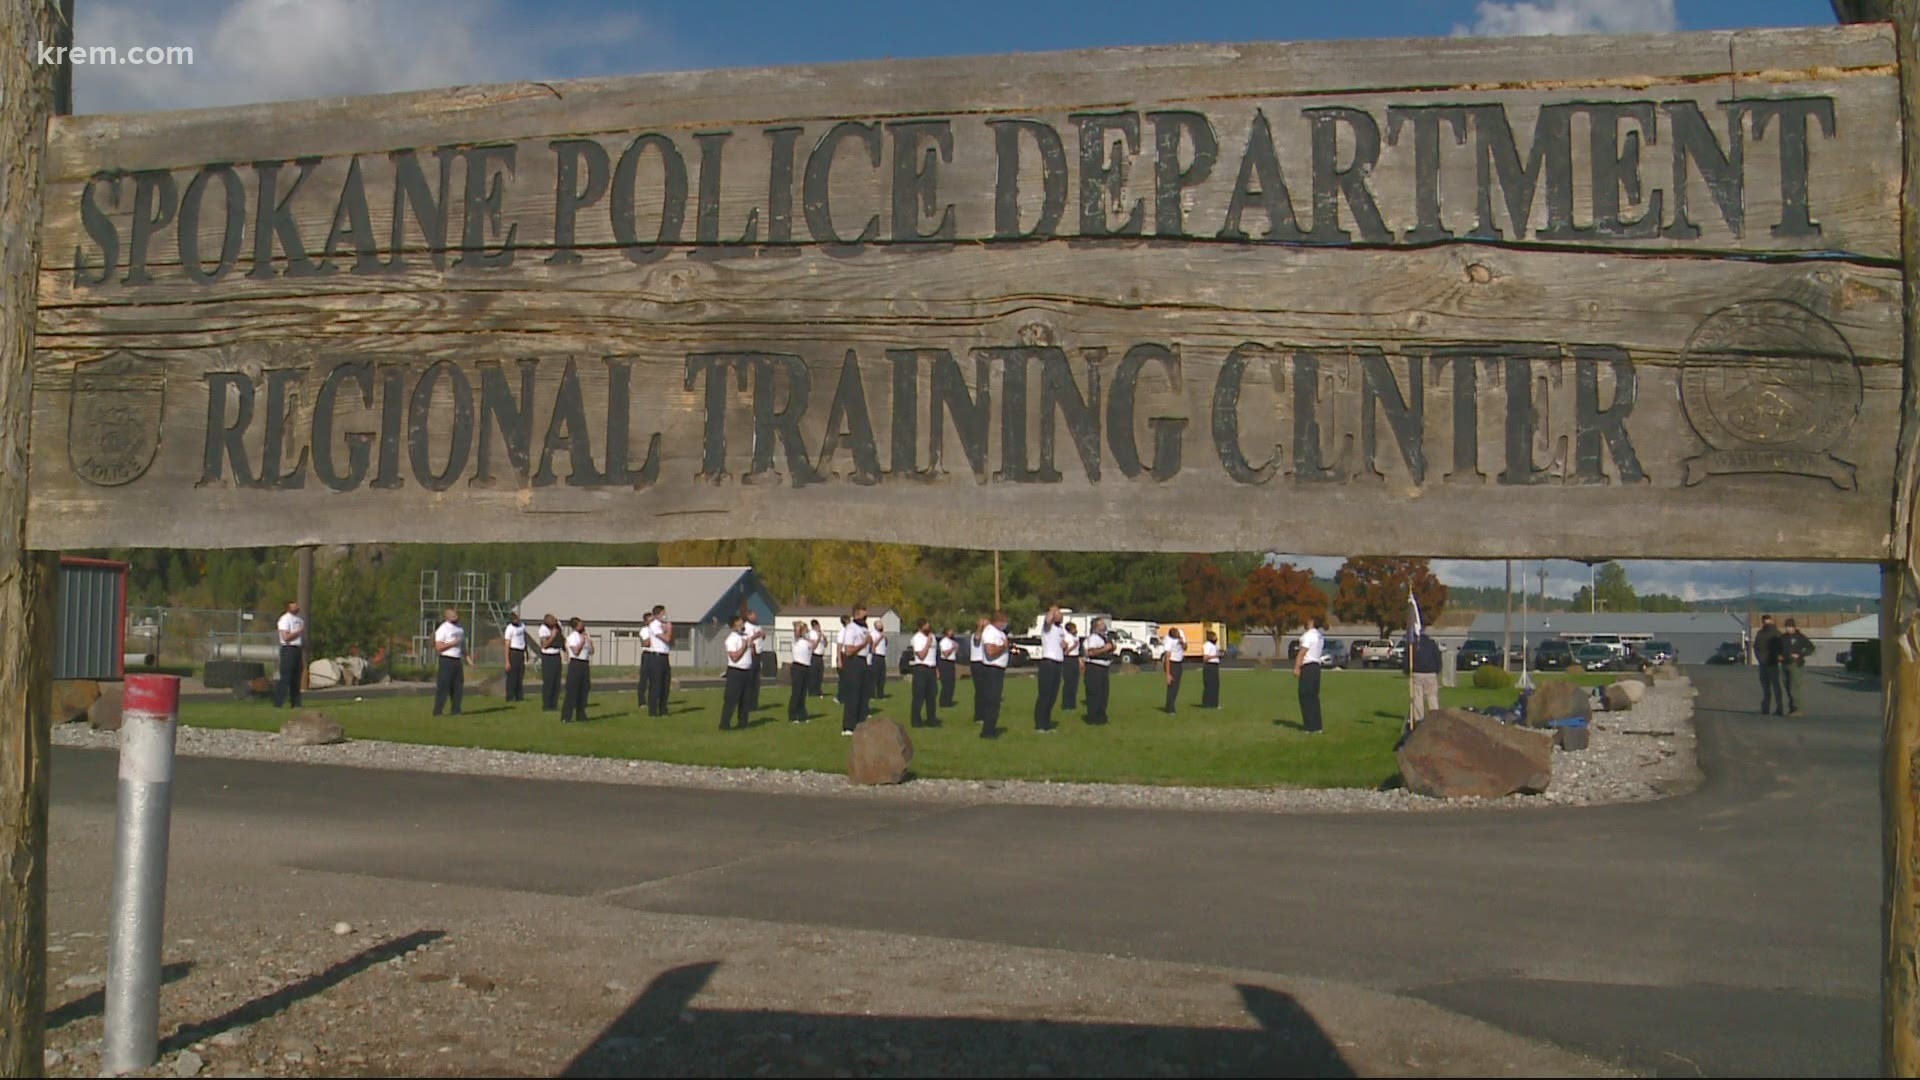 With policing under the spotlight amid national police brutality cases, departments including Spokane's are having trouble hiring new employees.